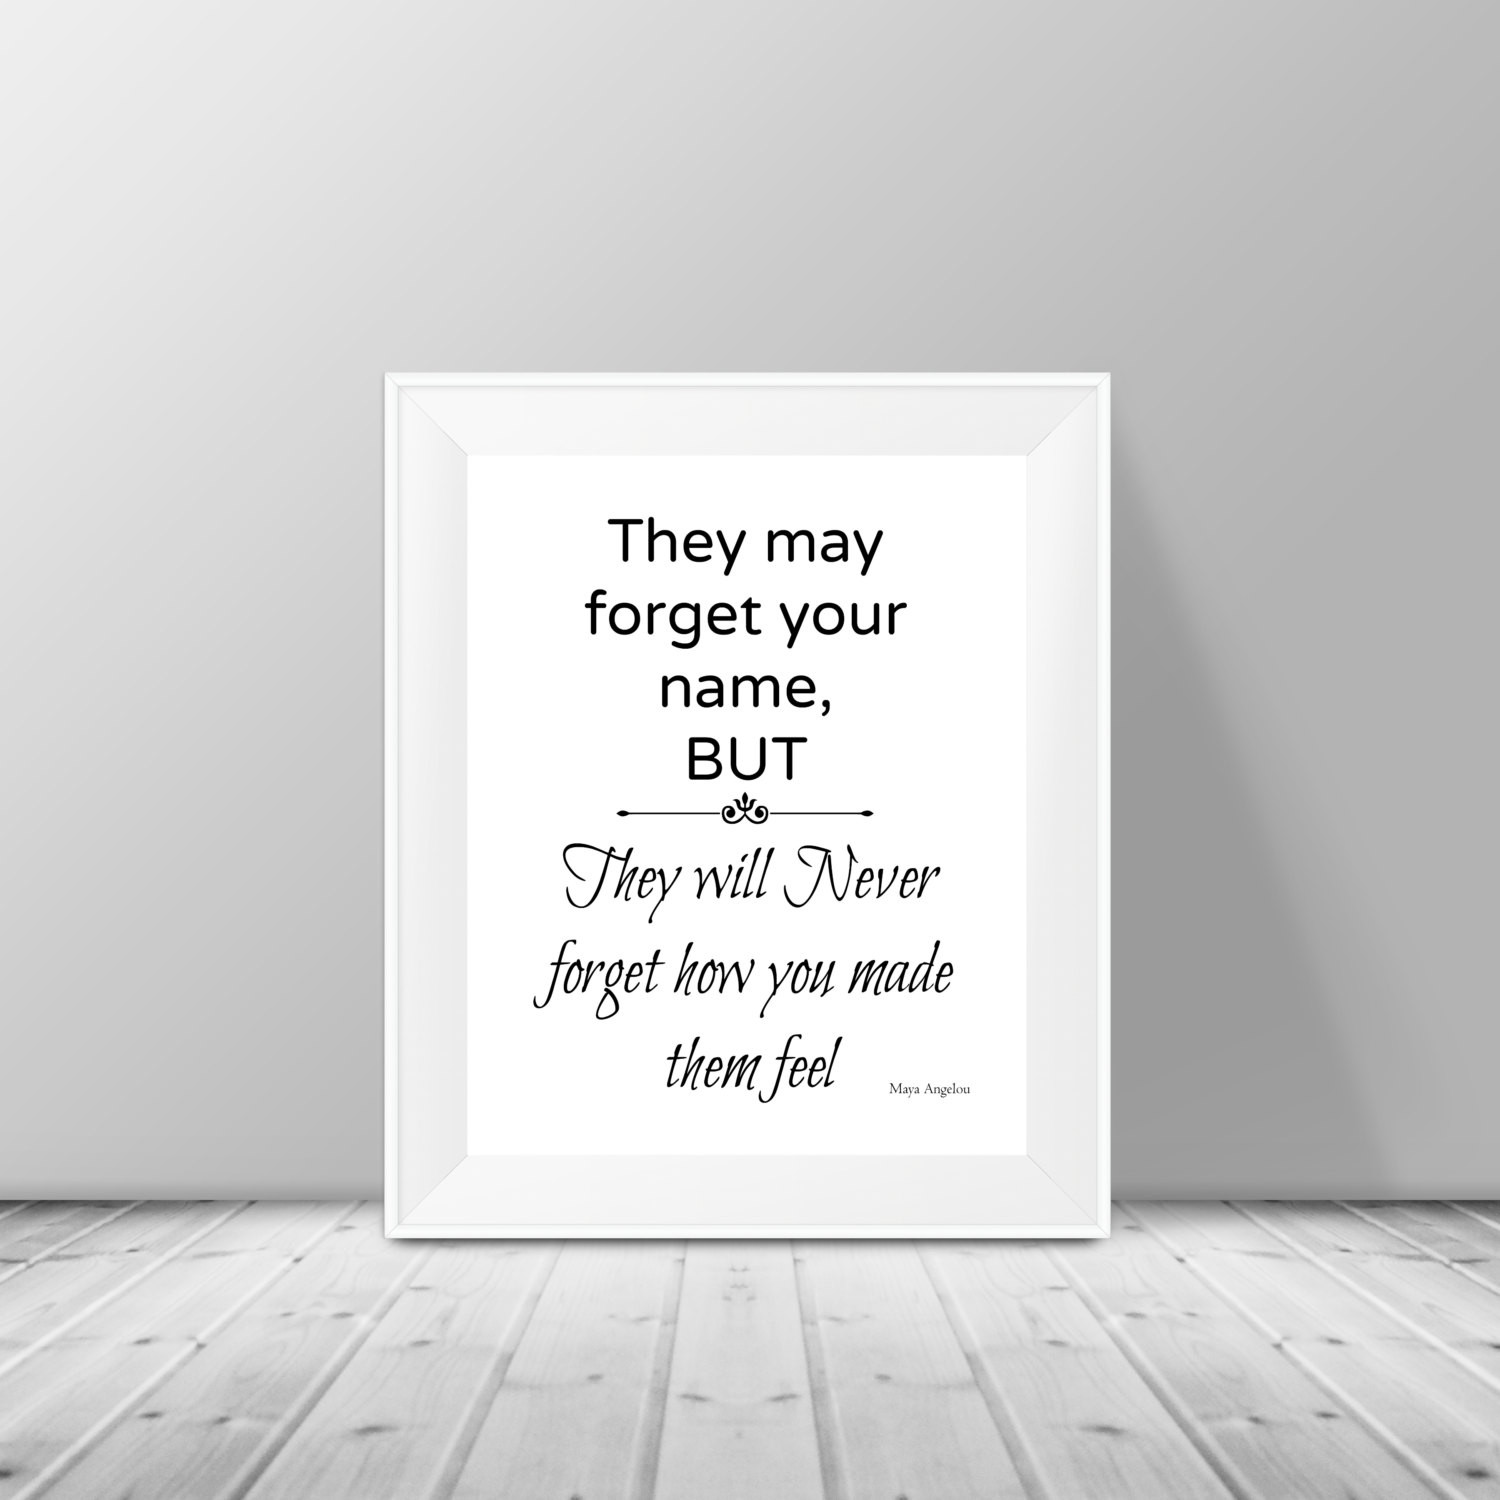 Maya Angelou Graduation Quotes
 Nurse Gift Maya AngelouThey may for your name